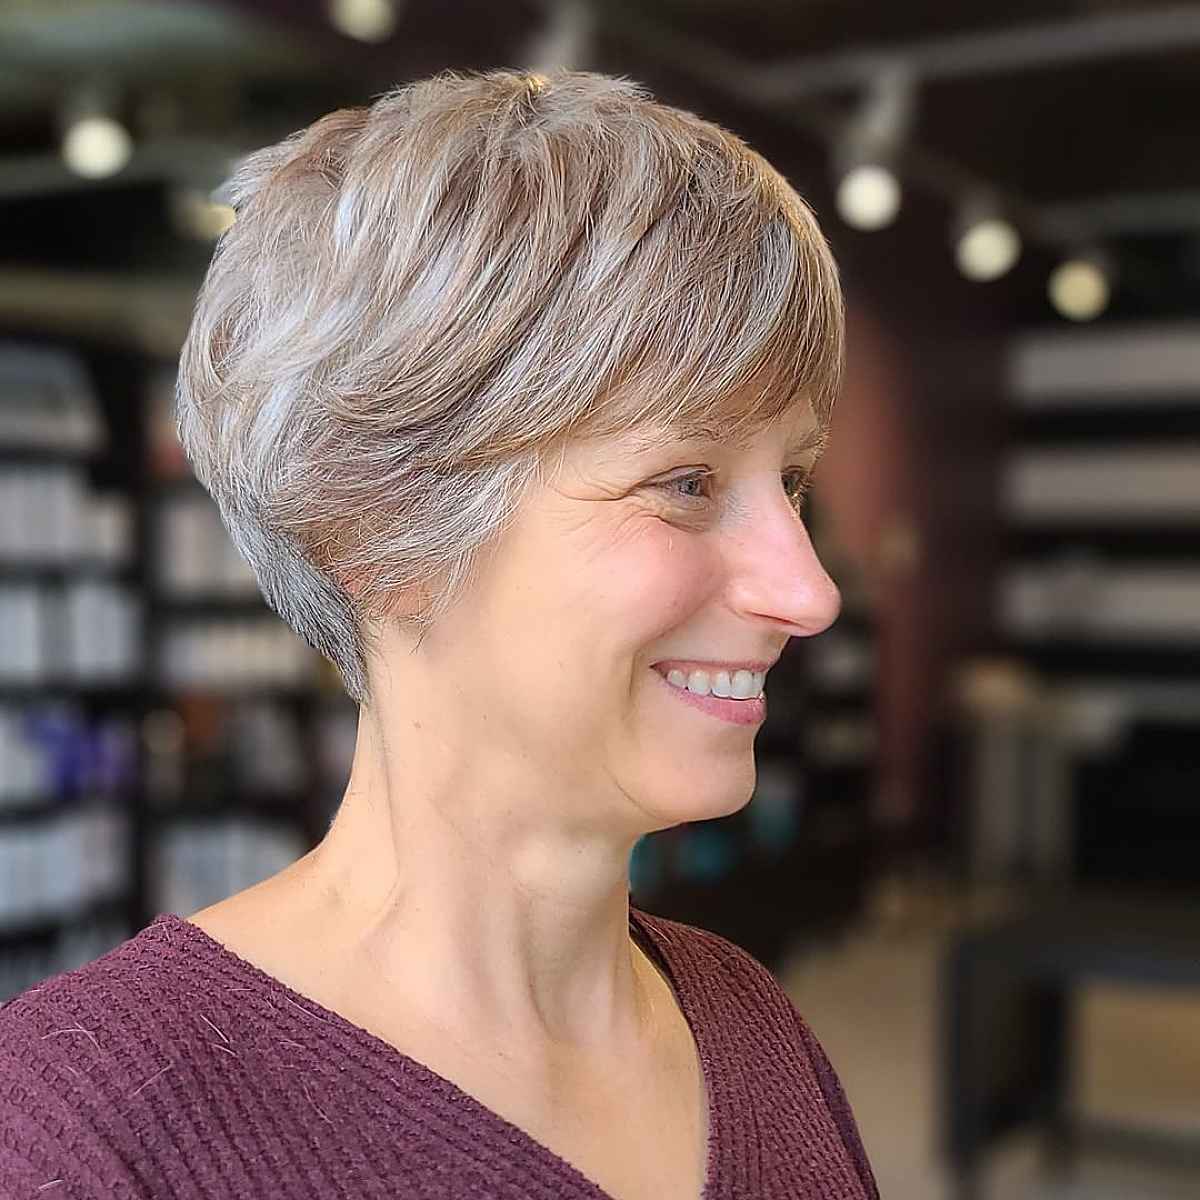 Long Pixie with Bangs for Mature Women with Gray Hair